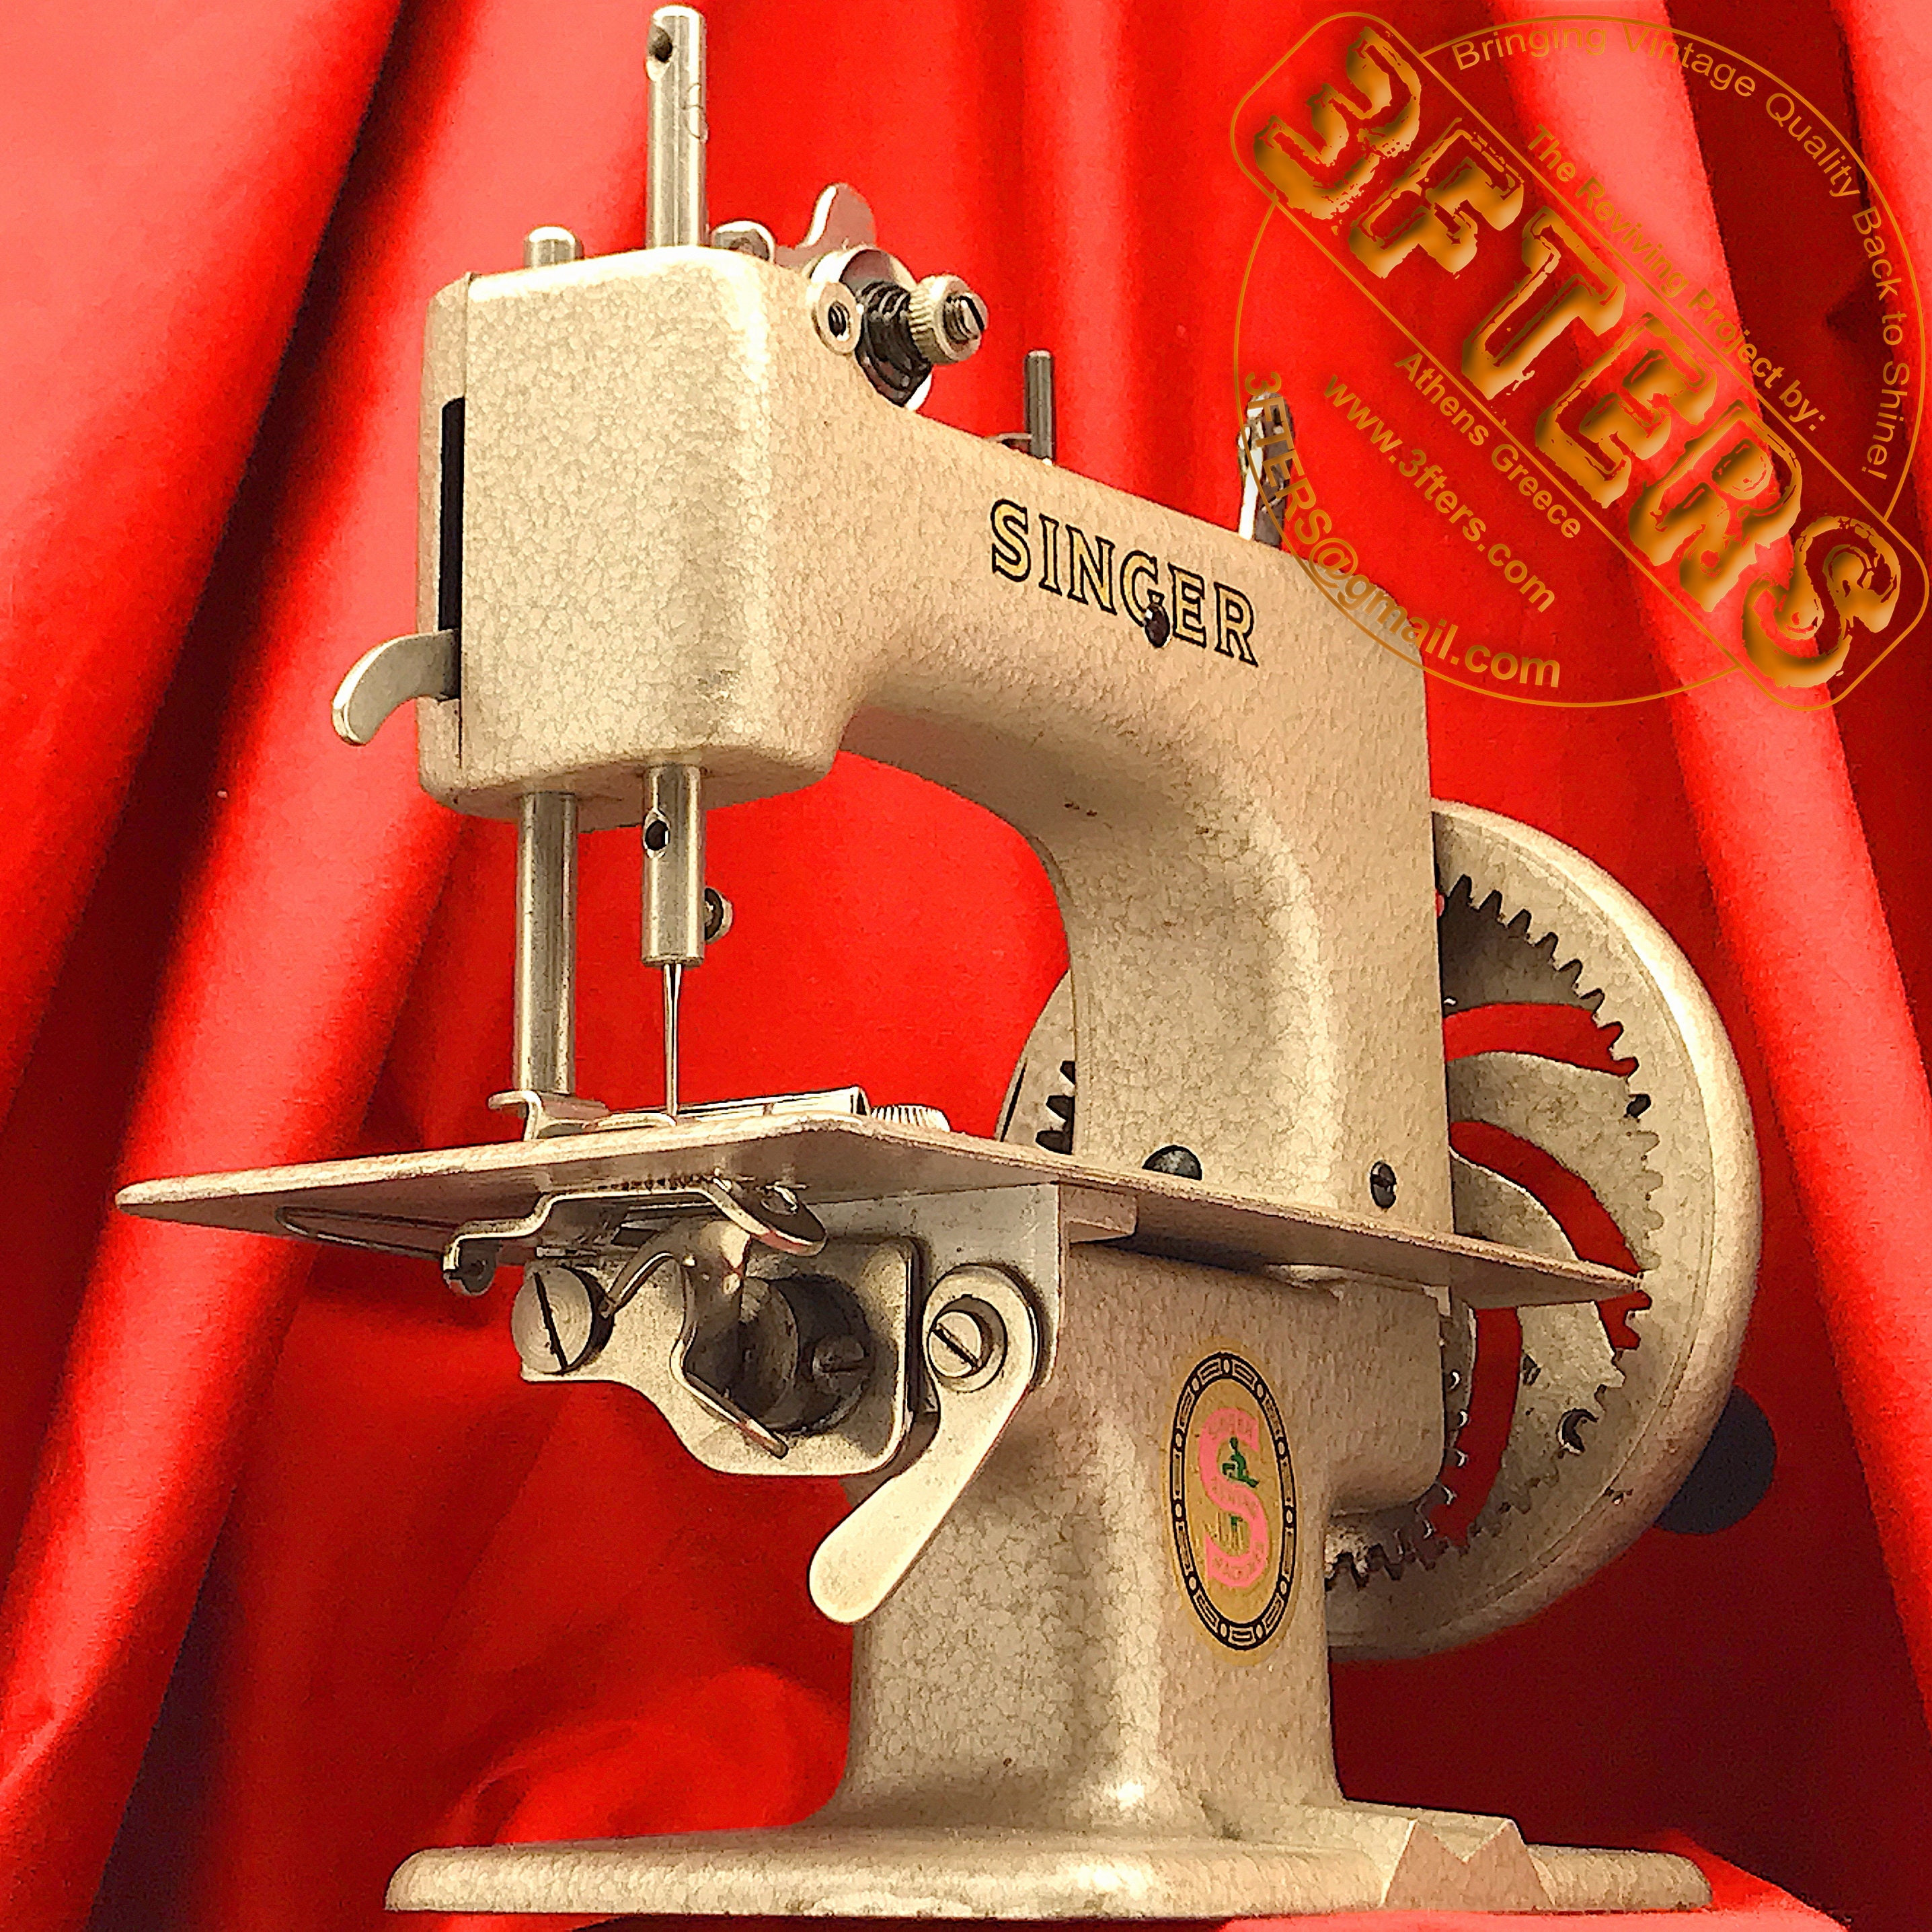 GOLD SINGER SEWHANDY 20 Child Toy Sewing Machine 20-10 Restored & Serviced  by 3FTERS 